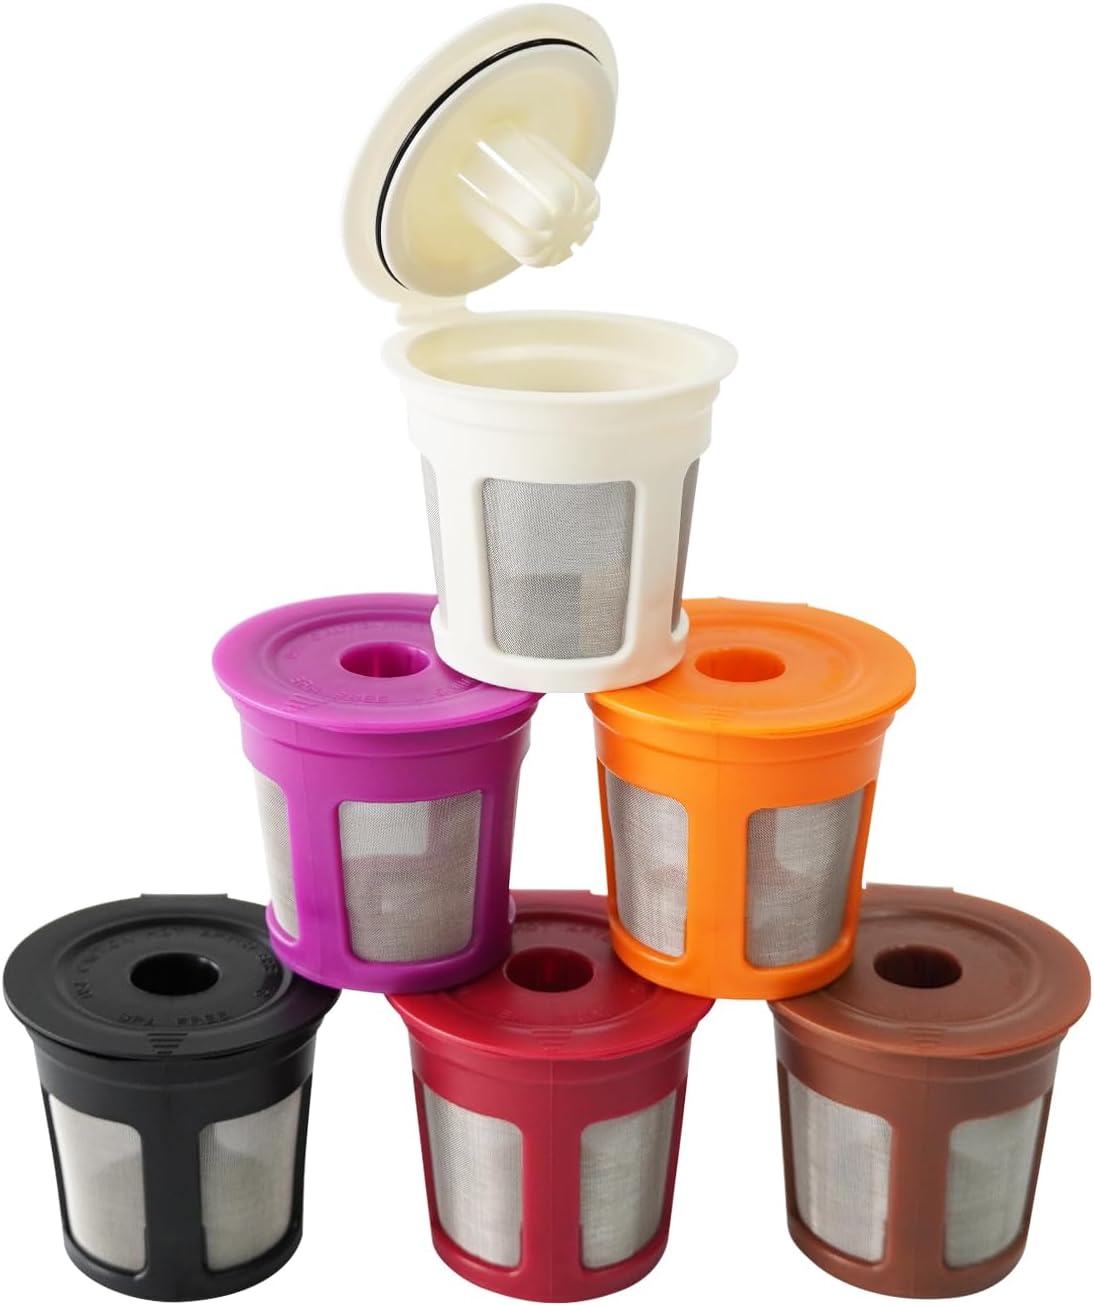 LVNASST 6-Pack Reusable K Cups for Keurig K-Mini K-Express Keurig 1.0  2.0 Brewers, Universal K Cup Refillable Filters for Single Serve K-Cup Coffee Maker, 6 Vibrant Colors for Brewing, BPA Free